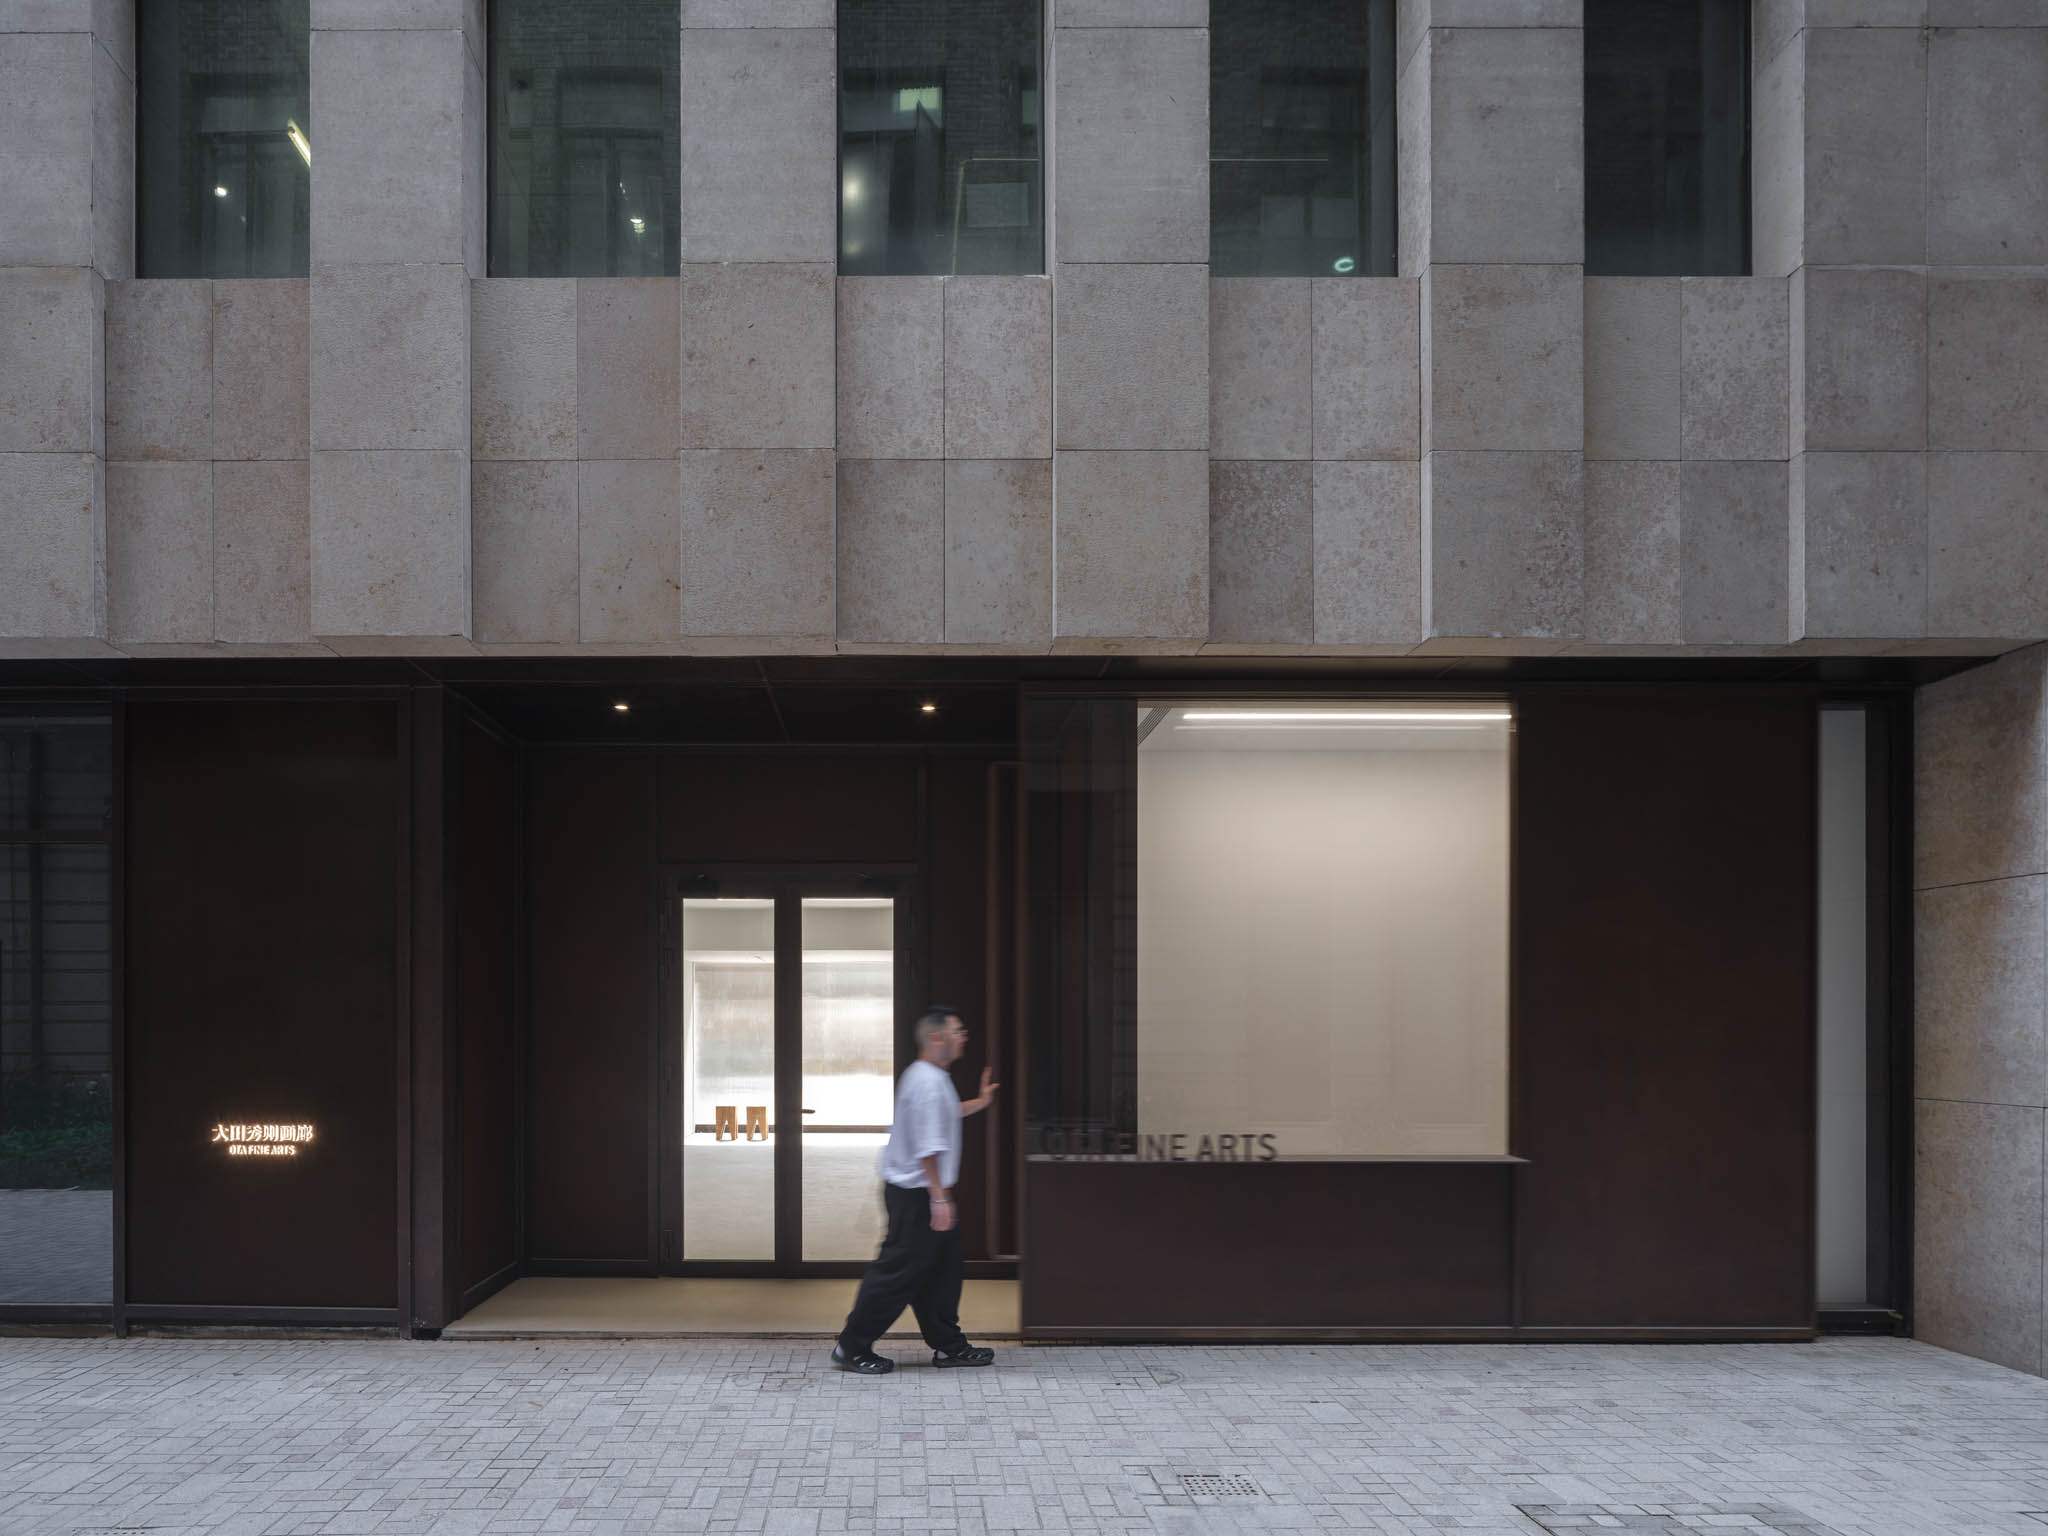 A man opens a large aged-metal sliding door to the gallery's entrance